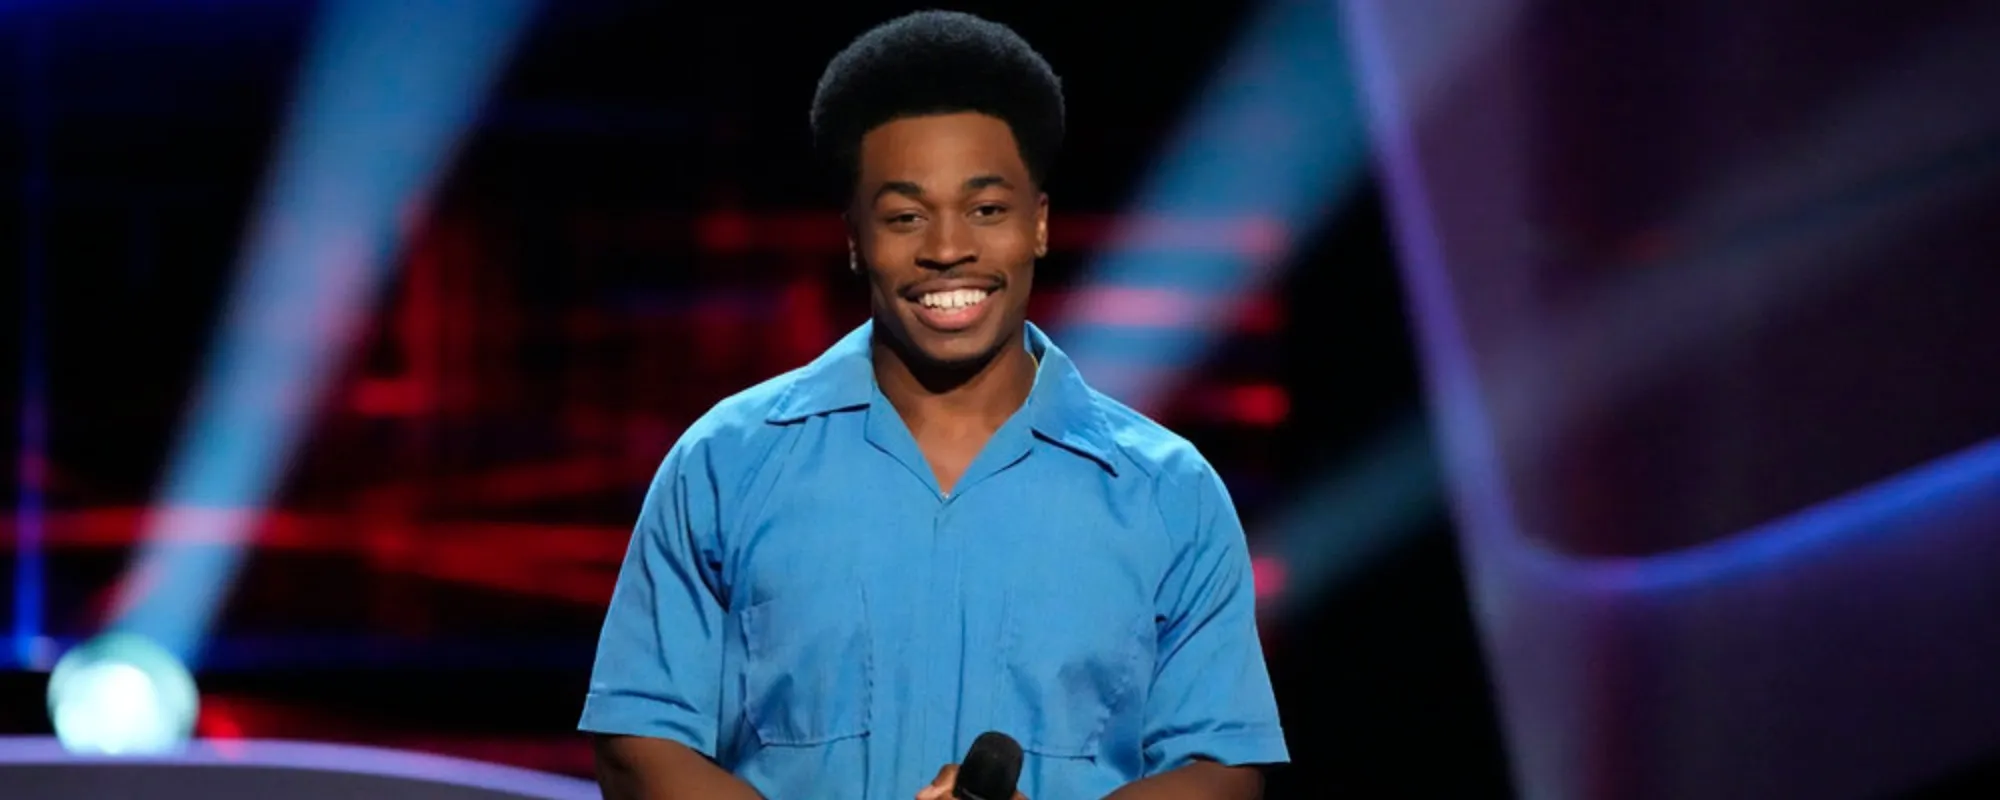 How a Slice of Cheesecake Landed ‘The Voice’ Star Nathan Chester on Team John Legend